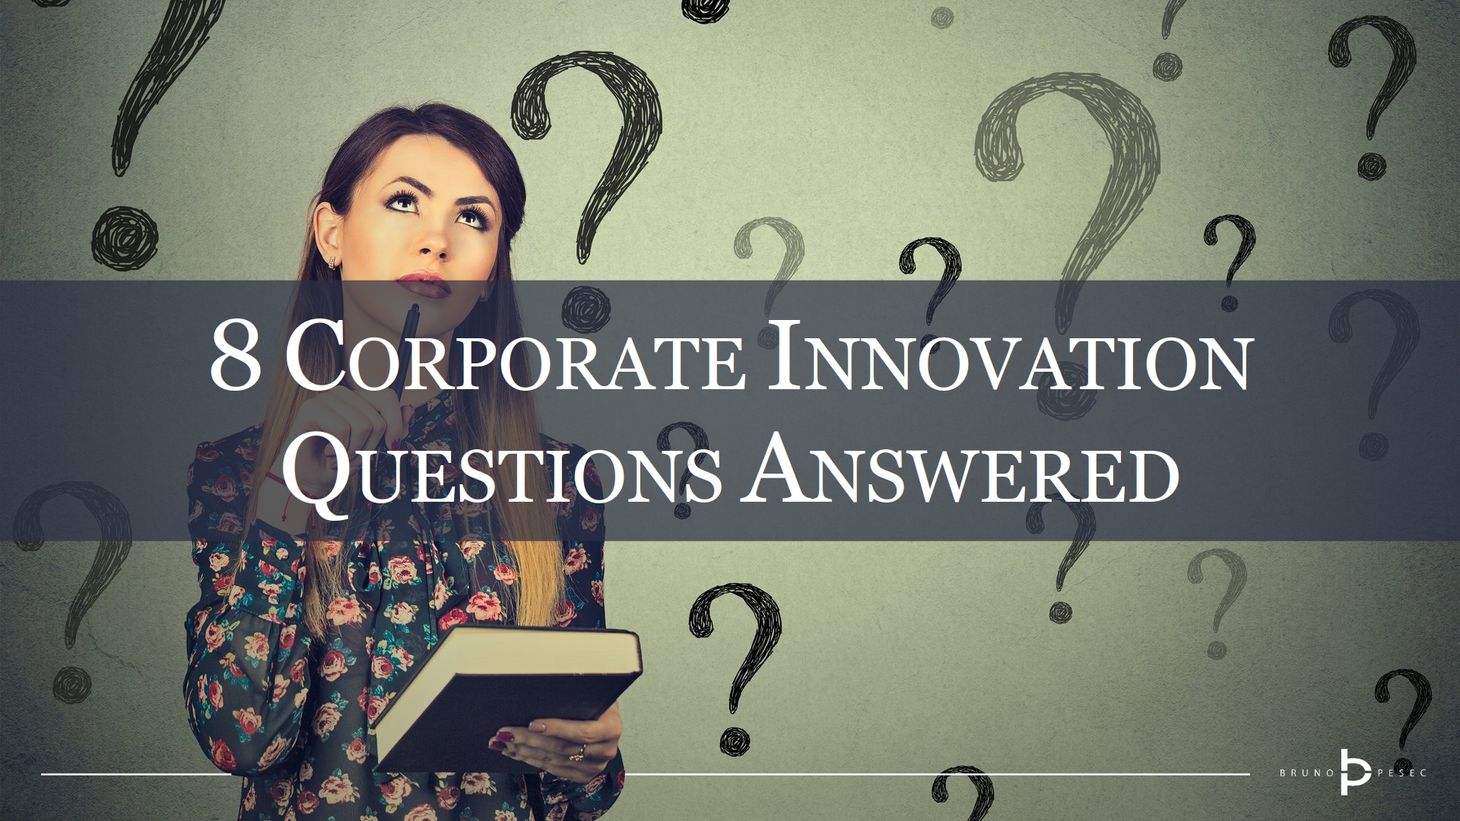 Eight corporate innovation questions answered